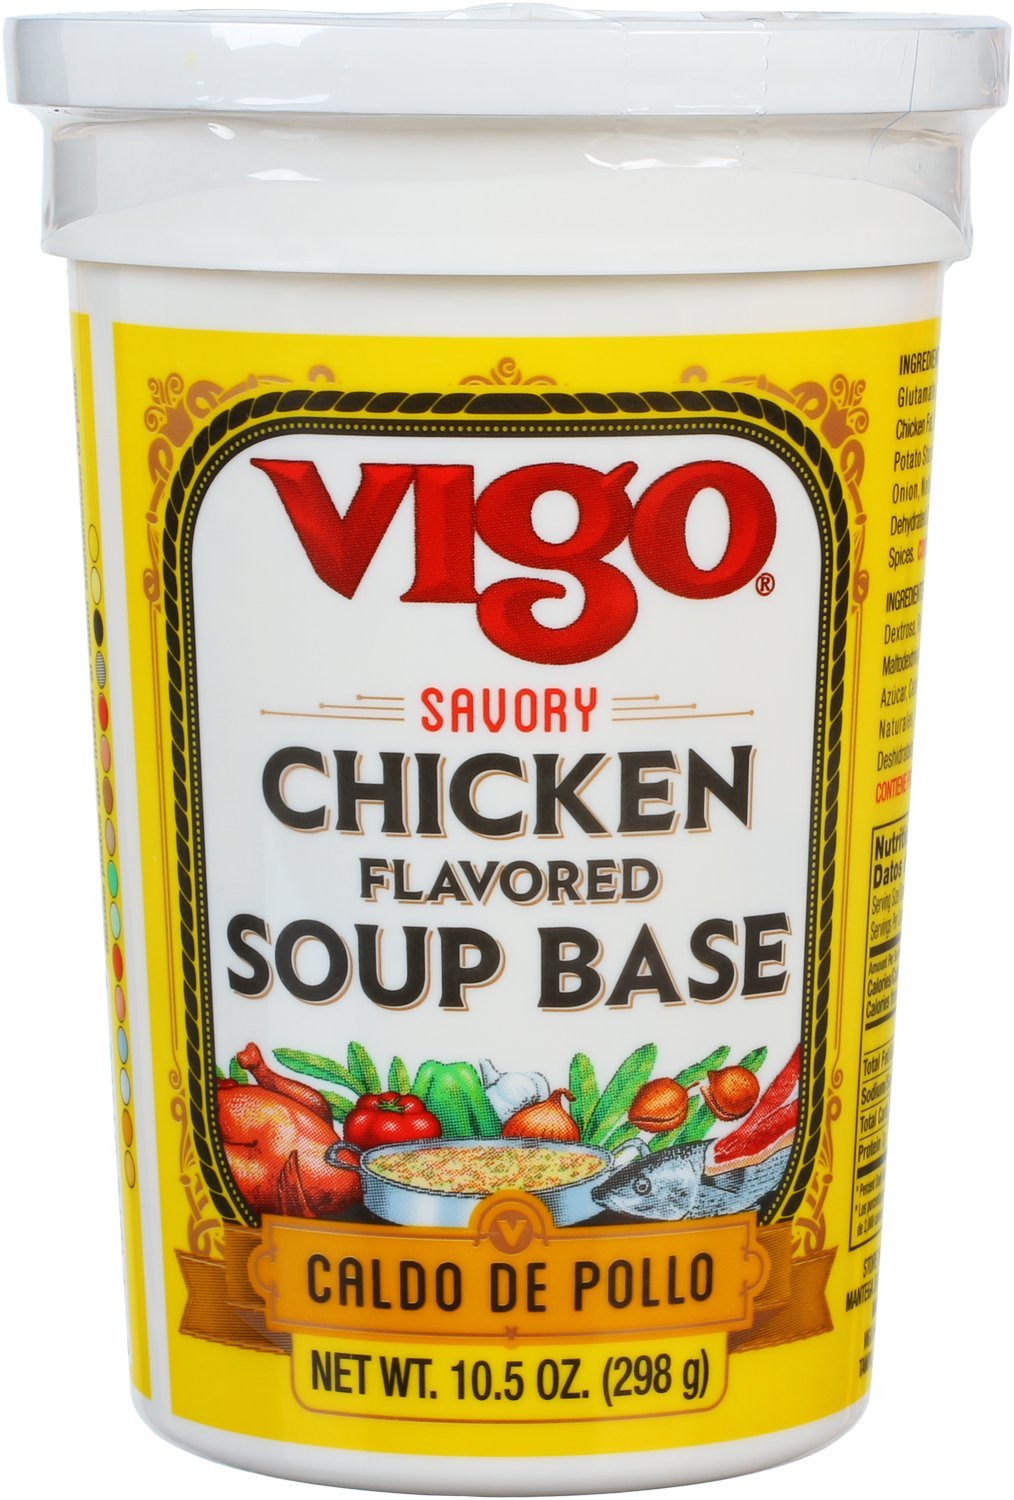 Vigo Chicken Flavored Soup Base, 10.5 Ounce (Pack of 6)